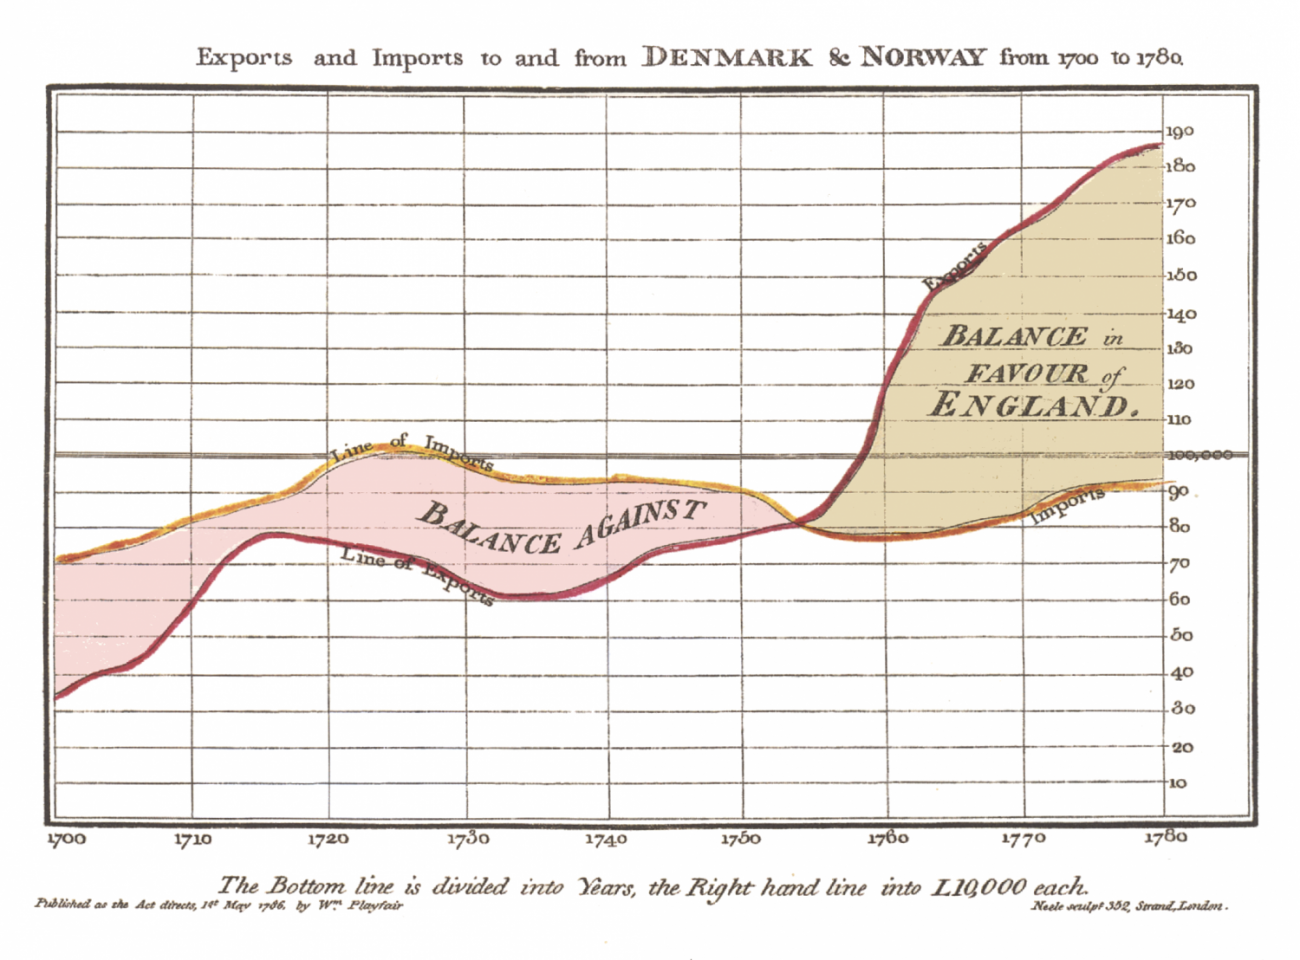 exports-and-imports-to-and-from-denmark--norway-from-1700-to-1780_50290bd829da0_w1500.png